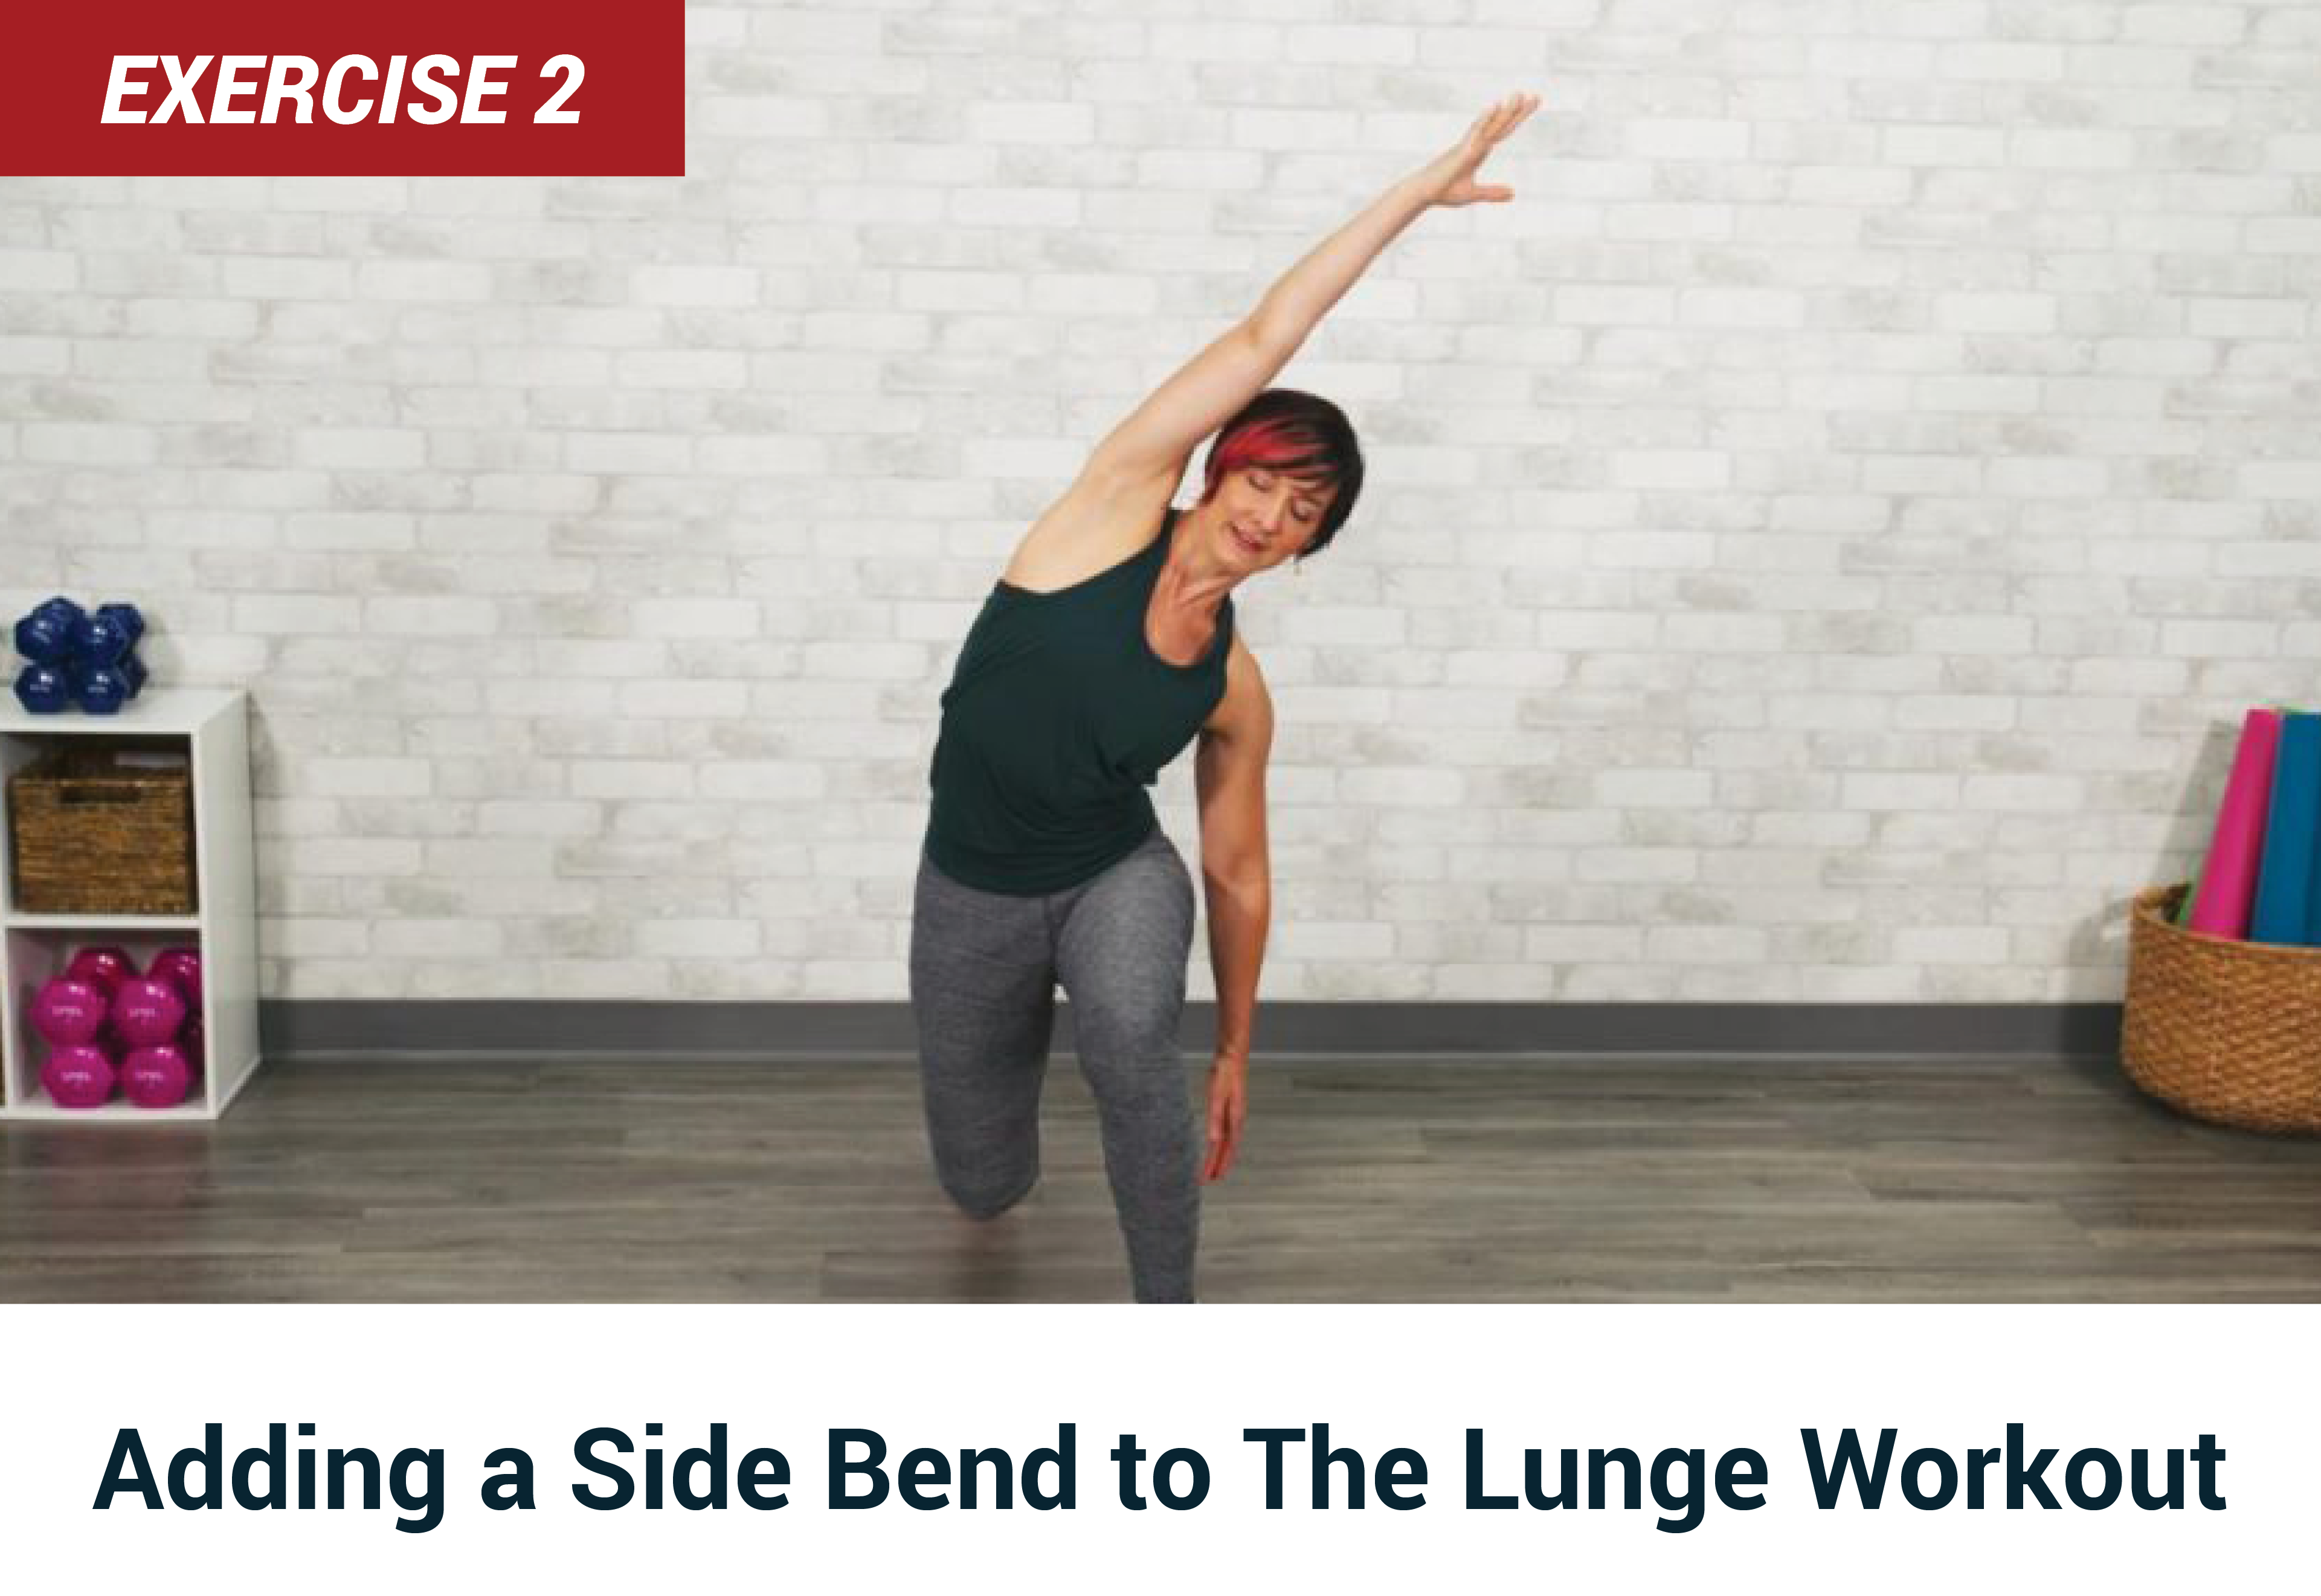 Adding a side bend to the lunge workout